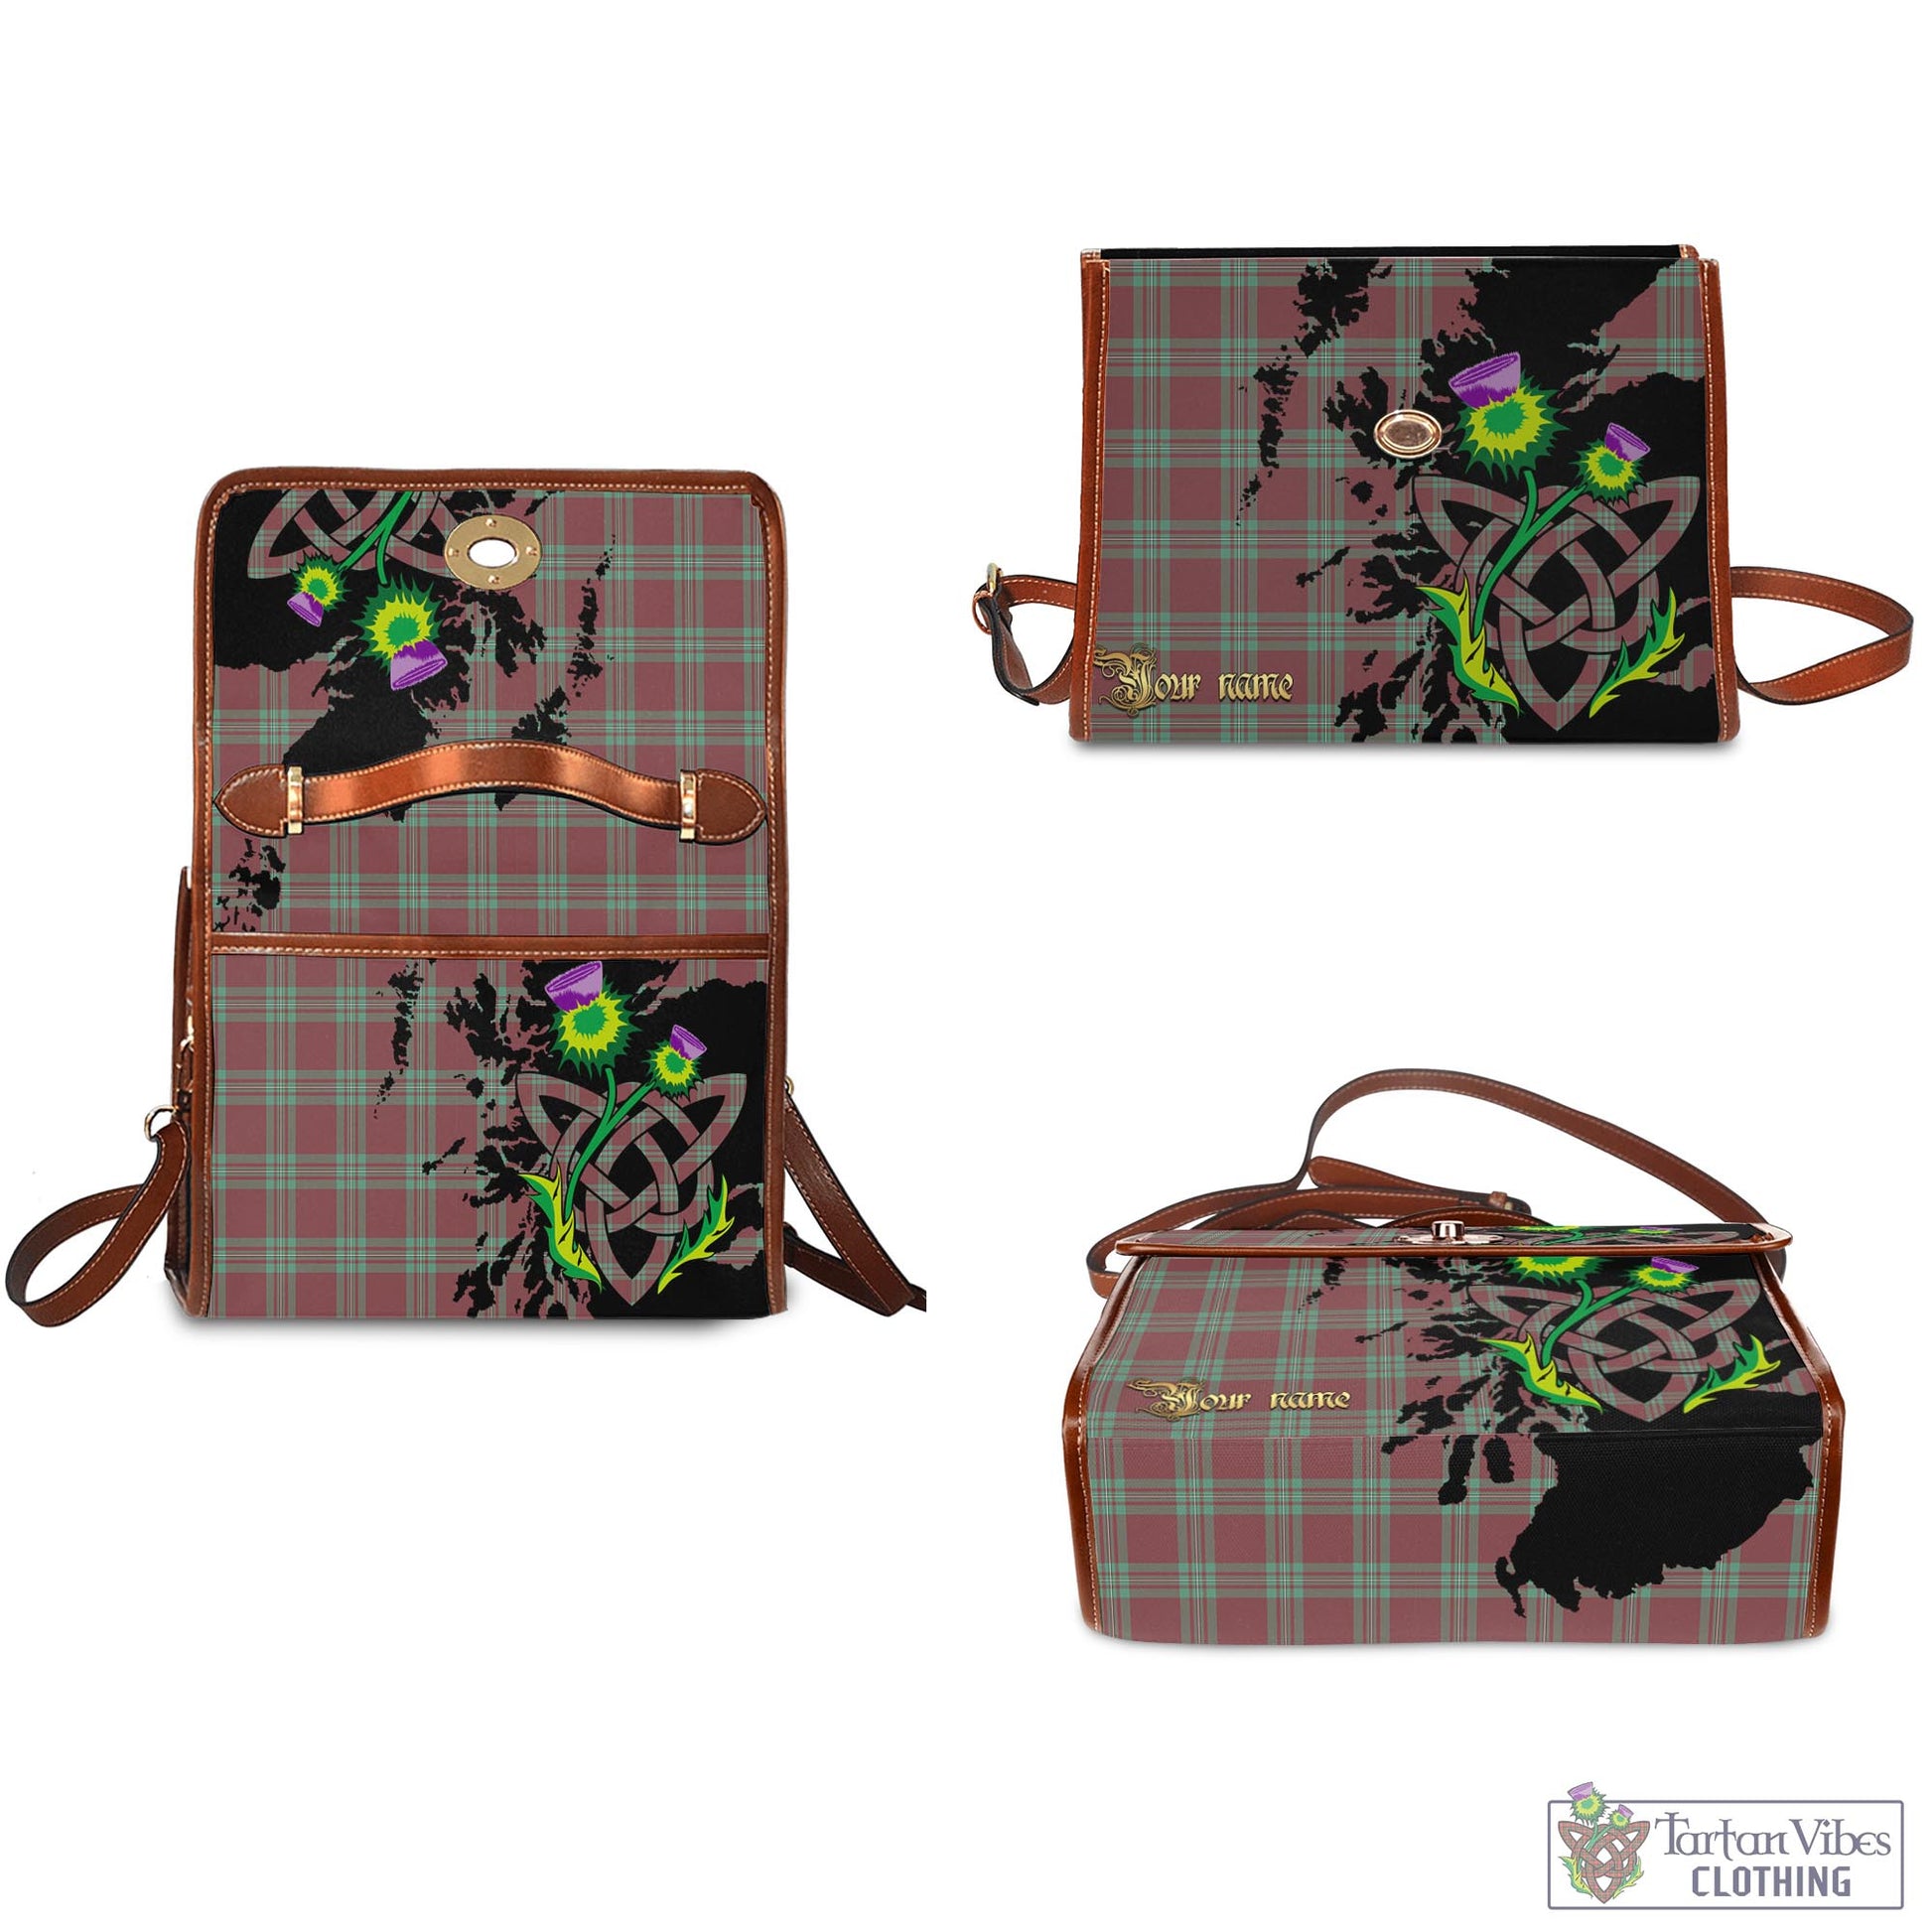 Tartan Vibes Clothing MacGregor Hunting Ancient Tartan Waterproof Canvas Bag with Scotland Map and Thistle Celtic Accents